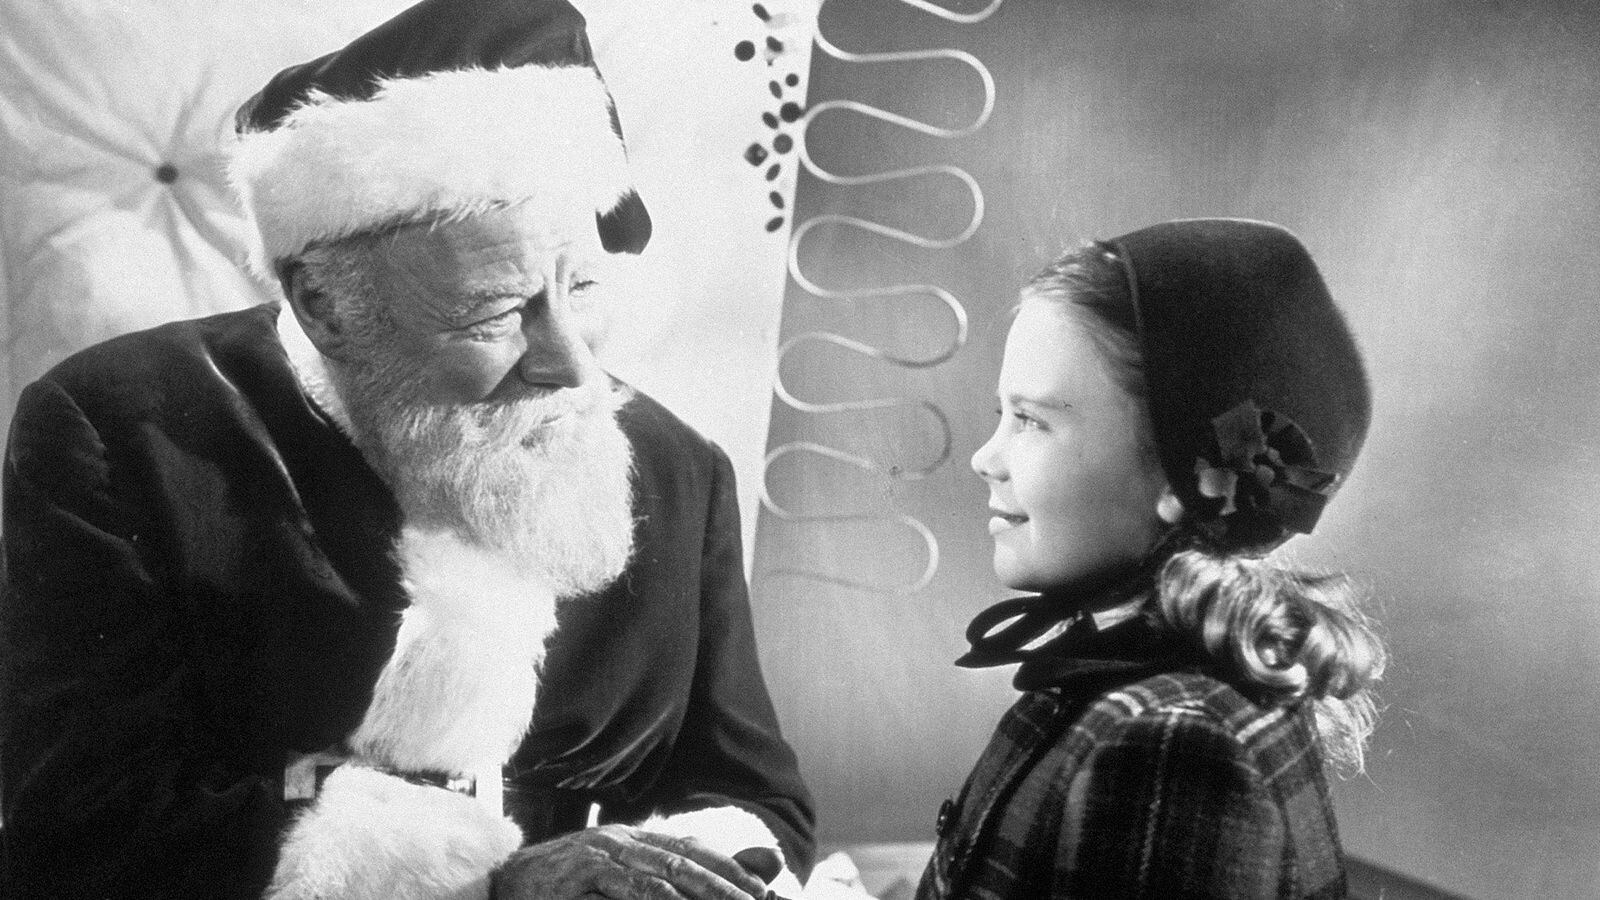 Actor Edmund Gwenn as Kris Kringle greets actress Natalie Wood in a scene from the 1947 film, Miracle on 34th Street.